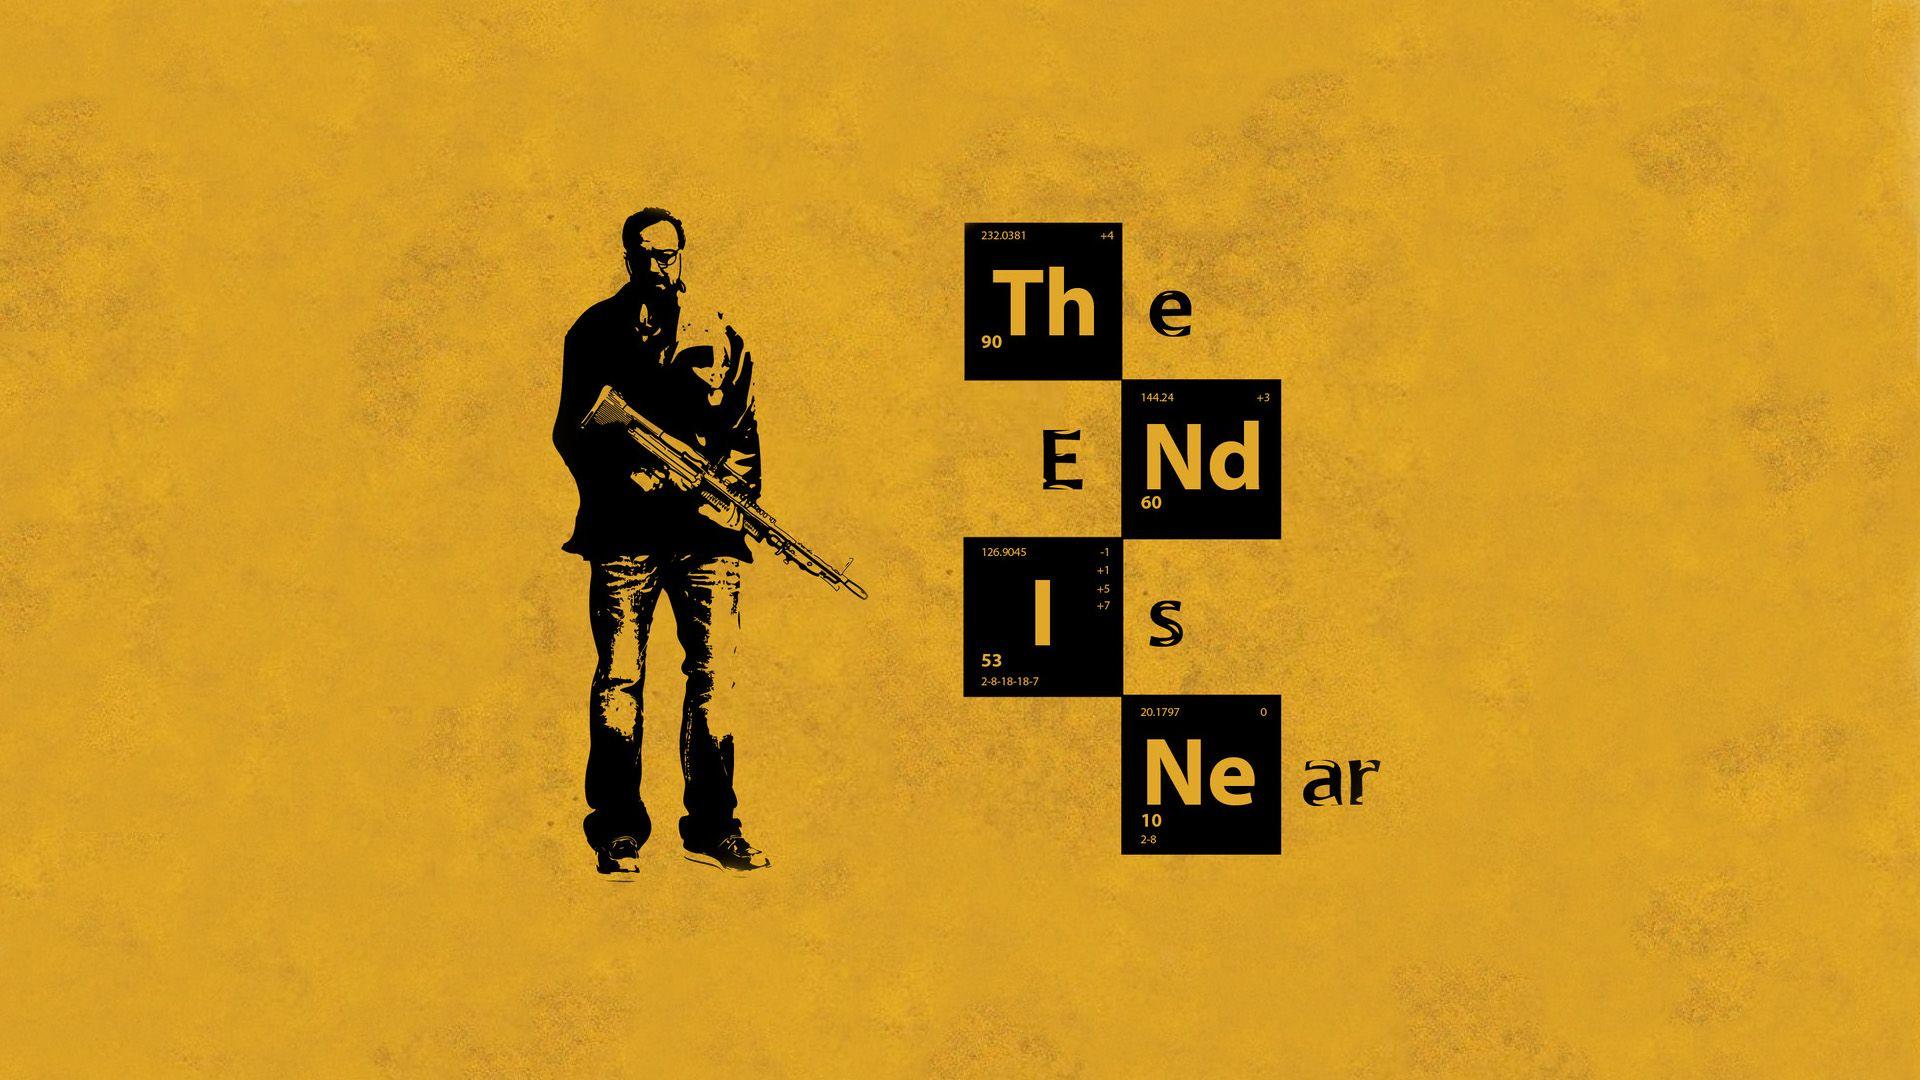 The End Is Near Breaking Bad, HD Tv Shows, 4k Wallpaper, Image